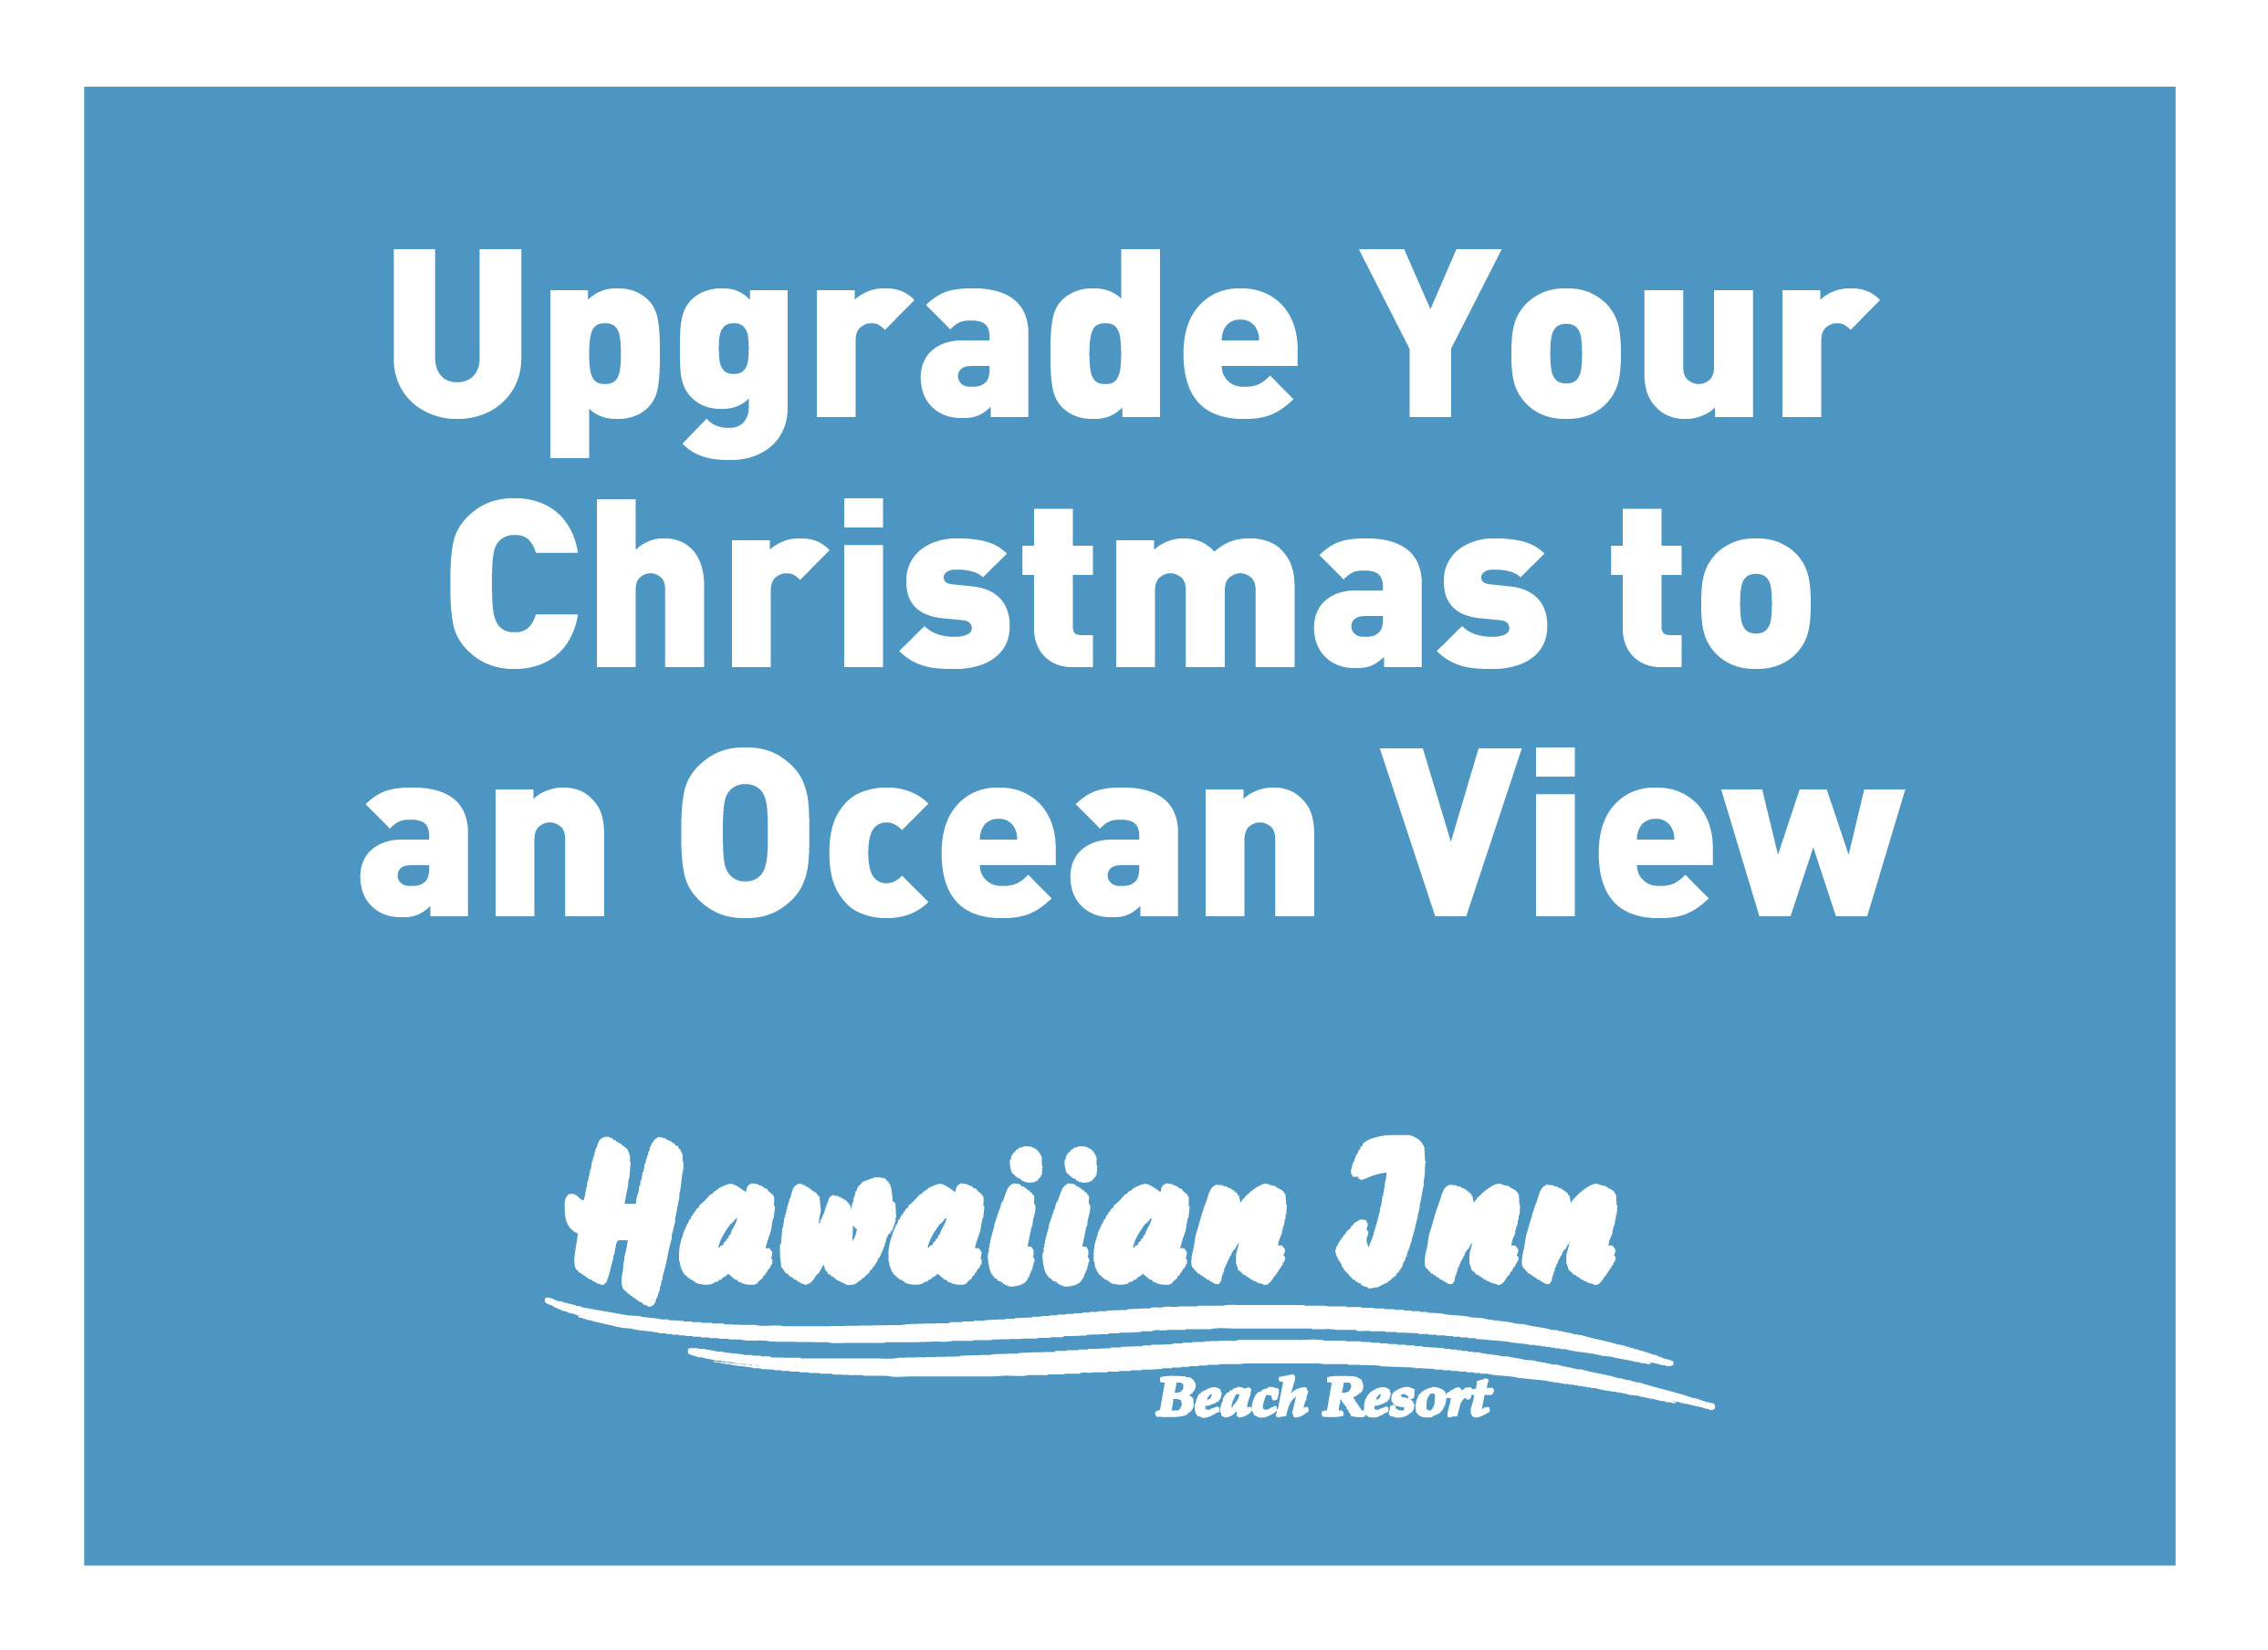 Upgrade your Christmas to an Ocean View